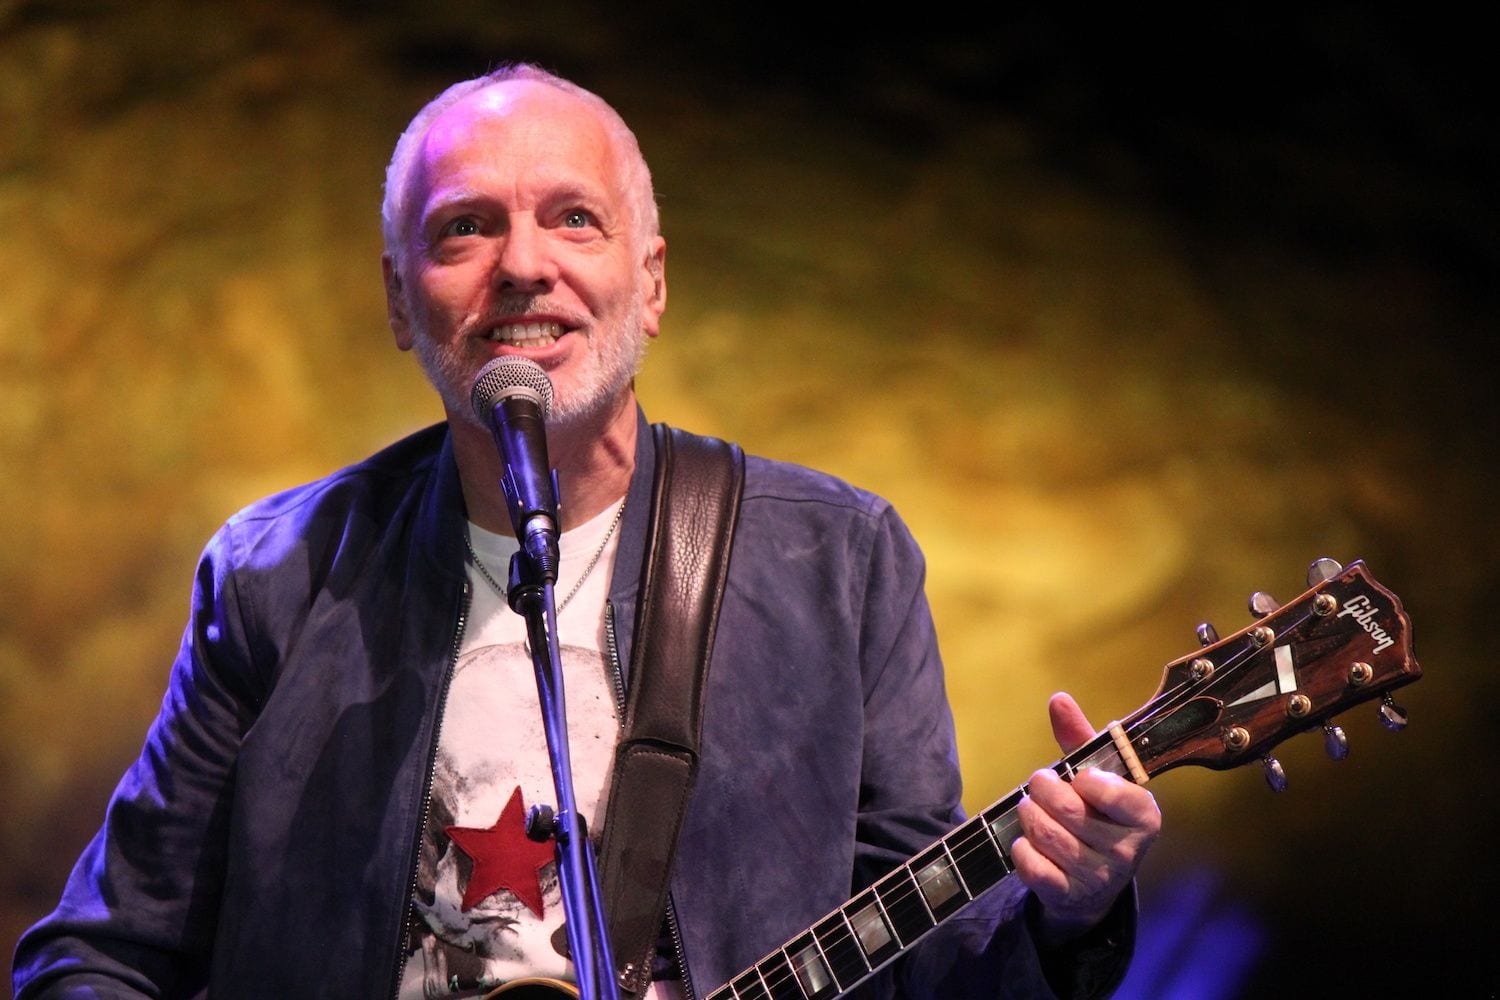 Witness the Spirit of ’76: Peter Frampton Comes Alive Again, 43 Years Later